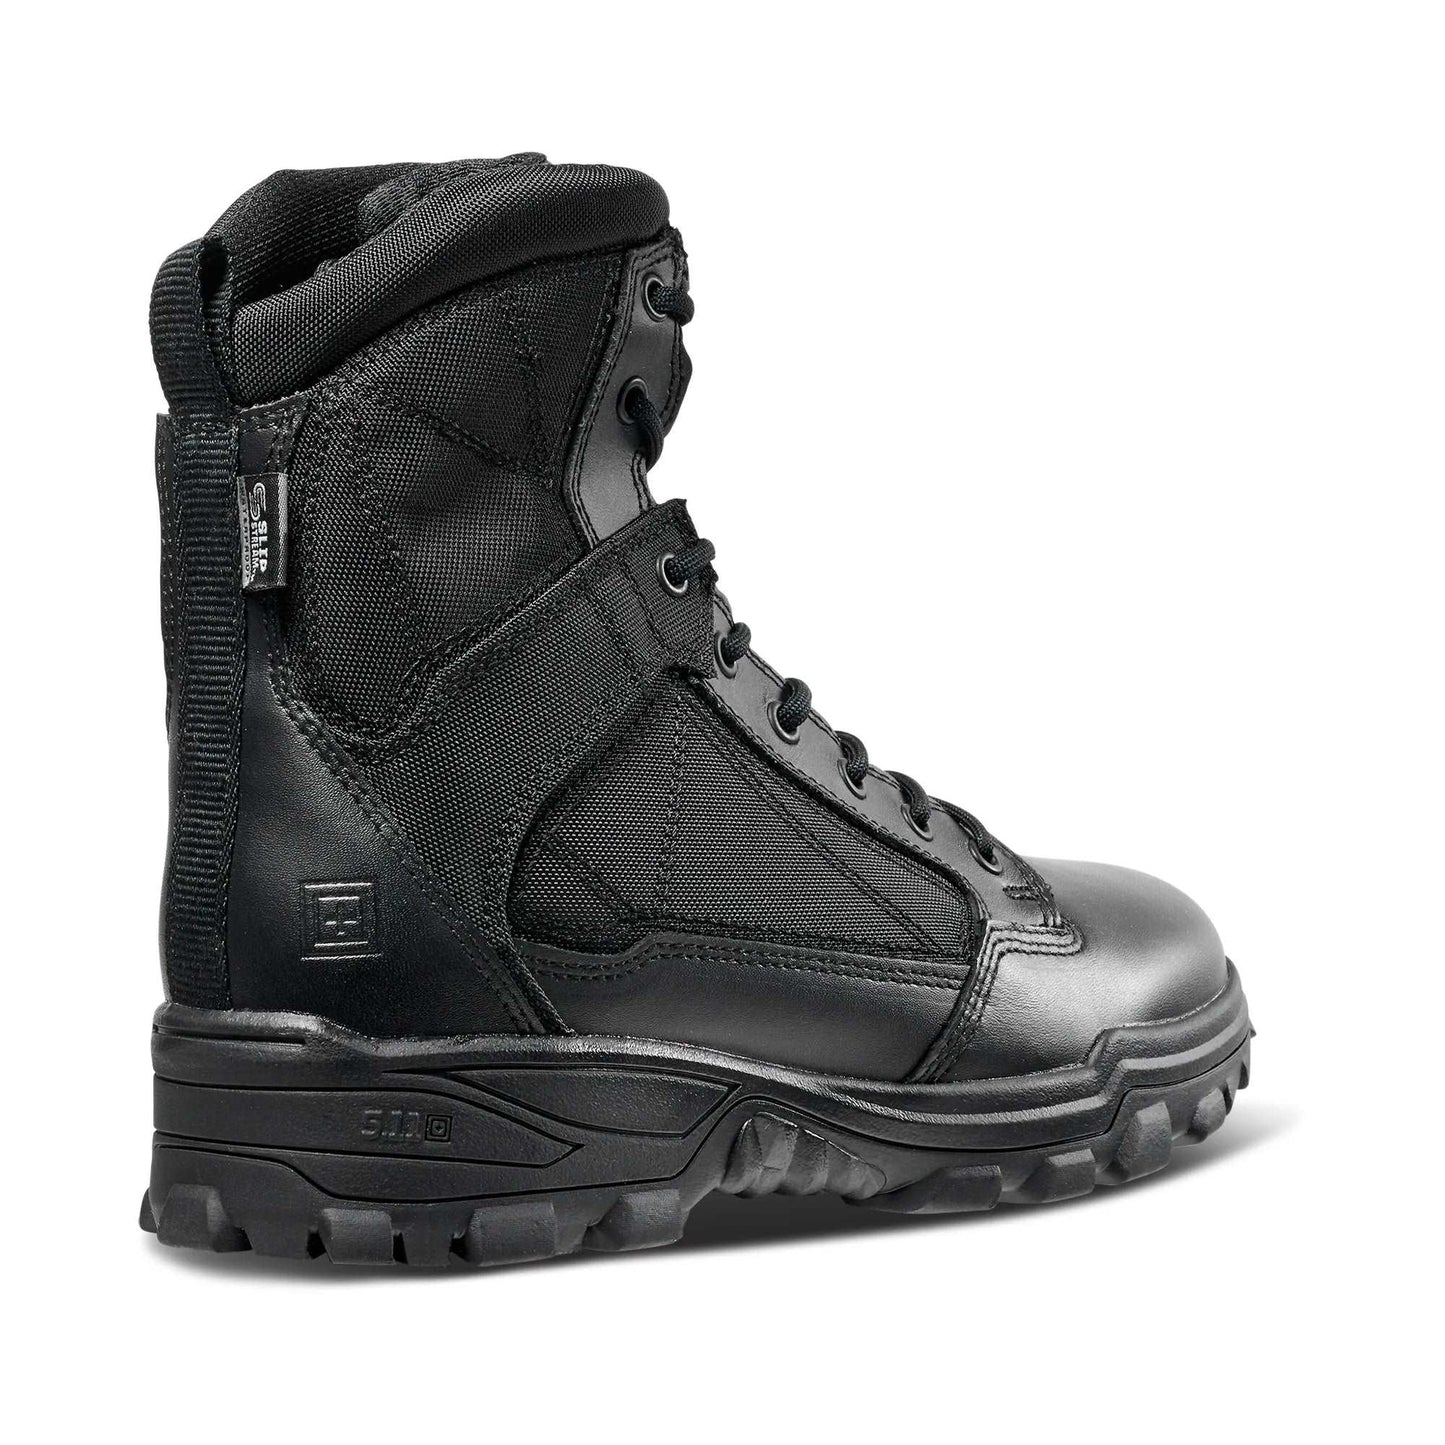 Boots - 5.11 Tactical Fast-Tac 6" Waterproof Boots